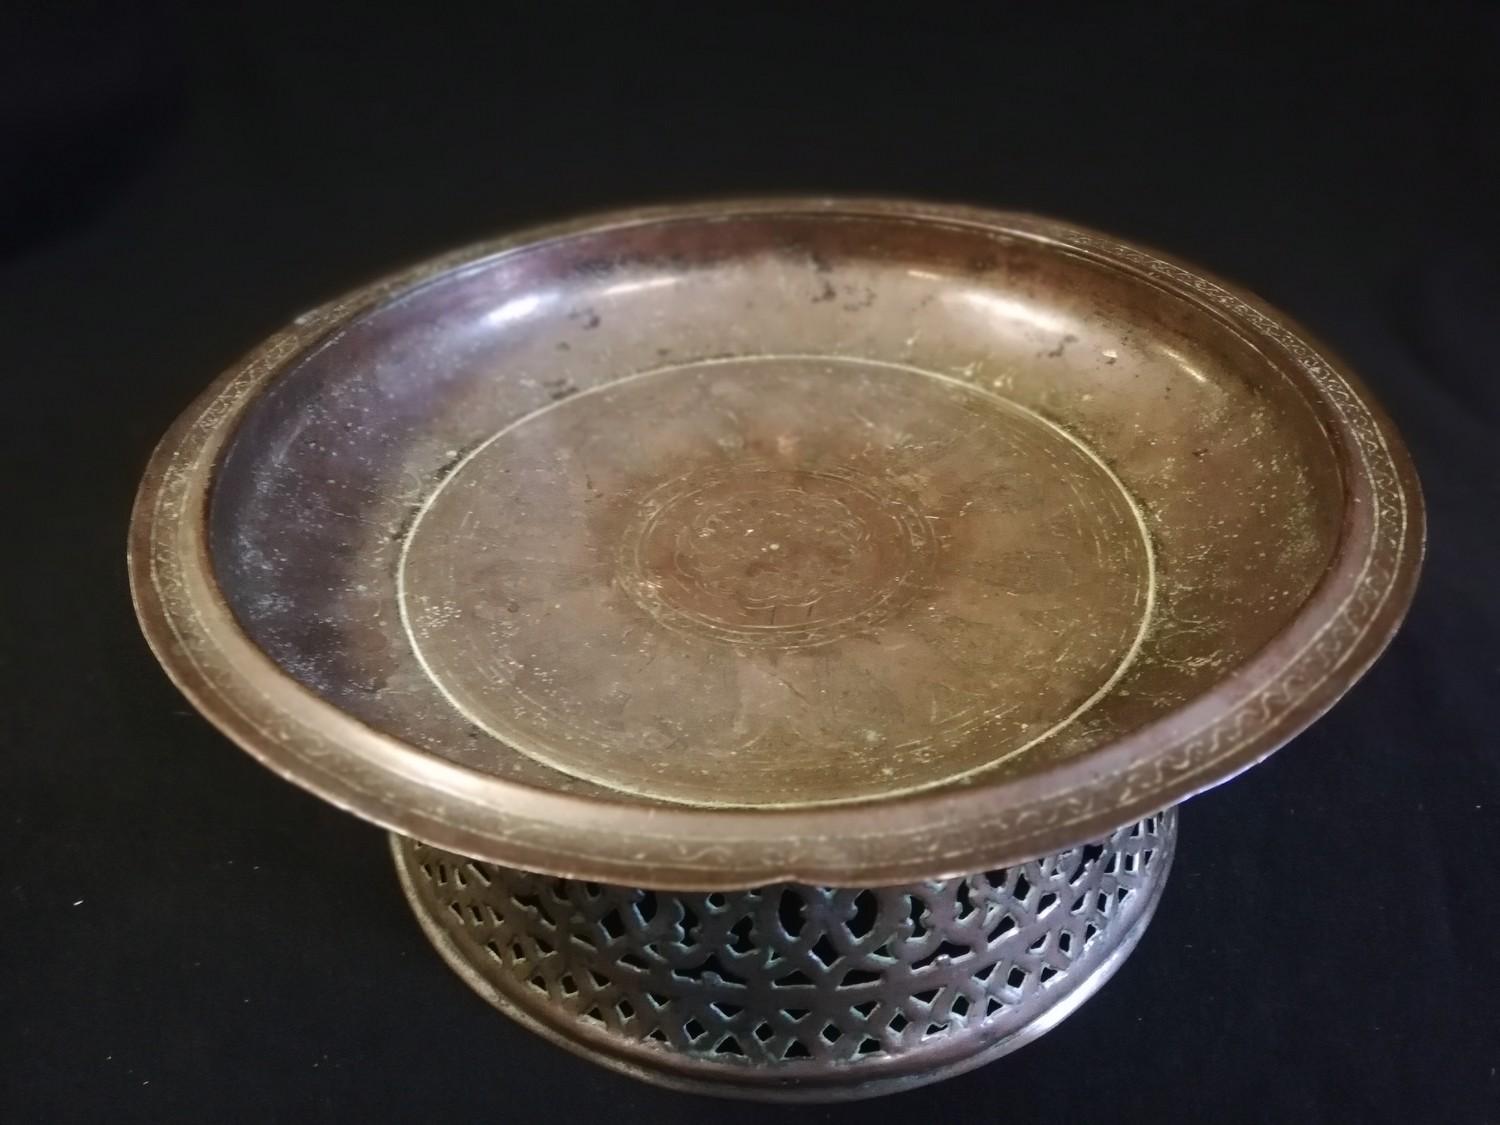 Antique copper Islamic censor stand with signature & number ???? (6451) under rim - Image 2 of 5